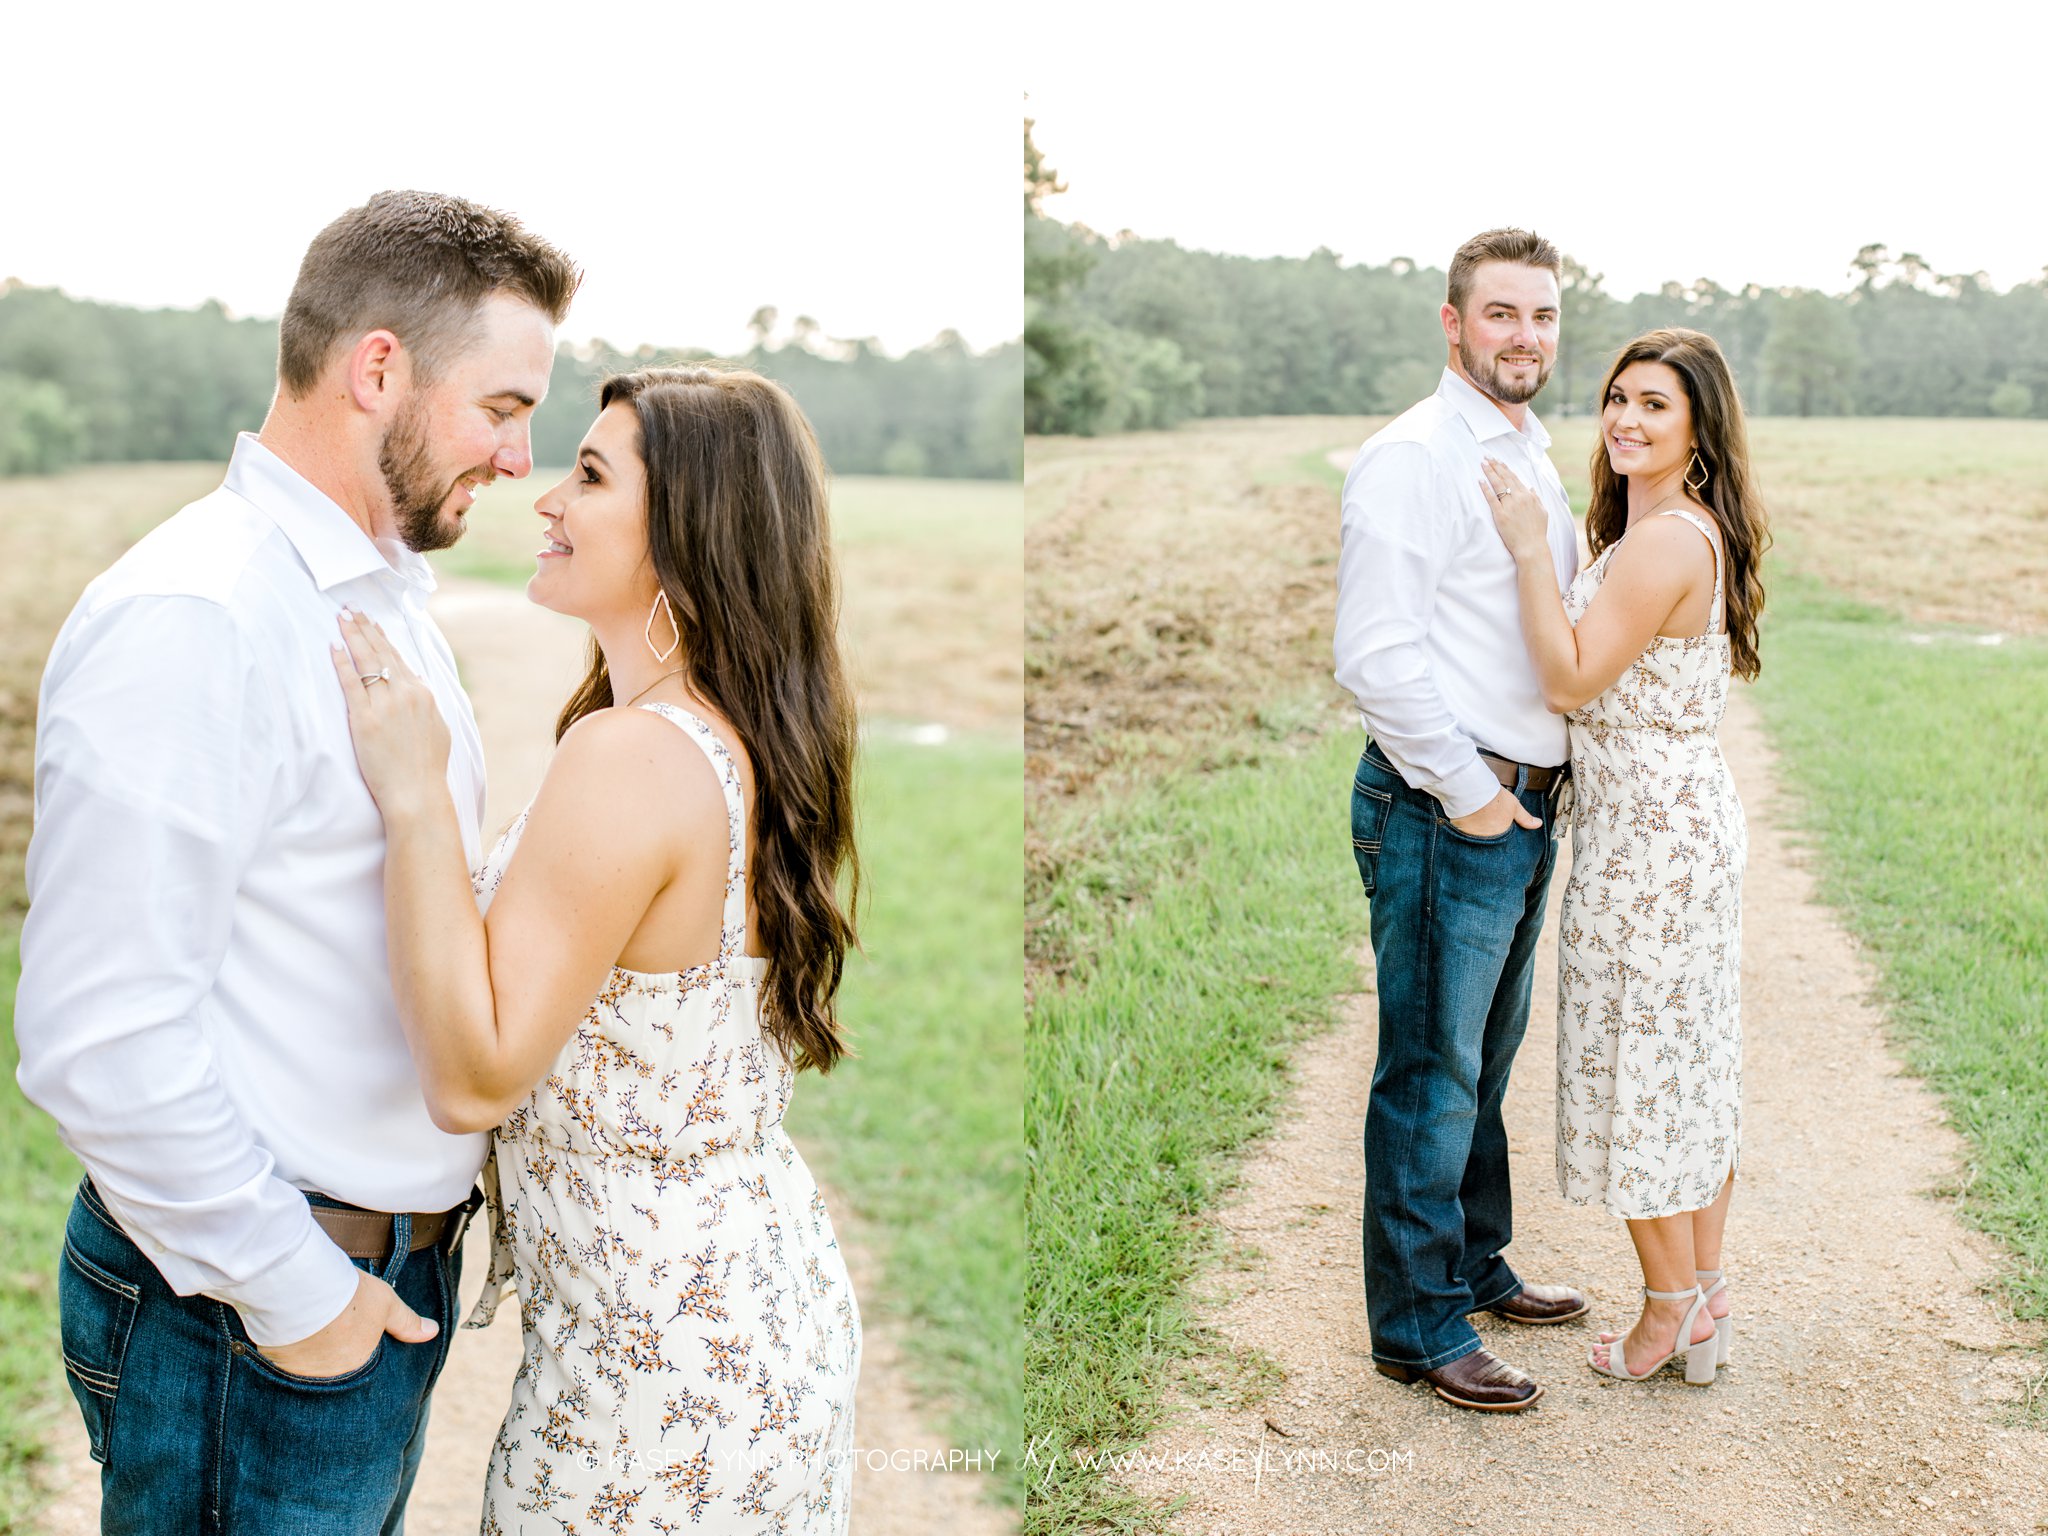 Texas Engagement Session / Kasey Lynn Photography